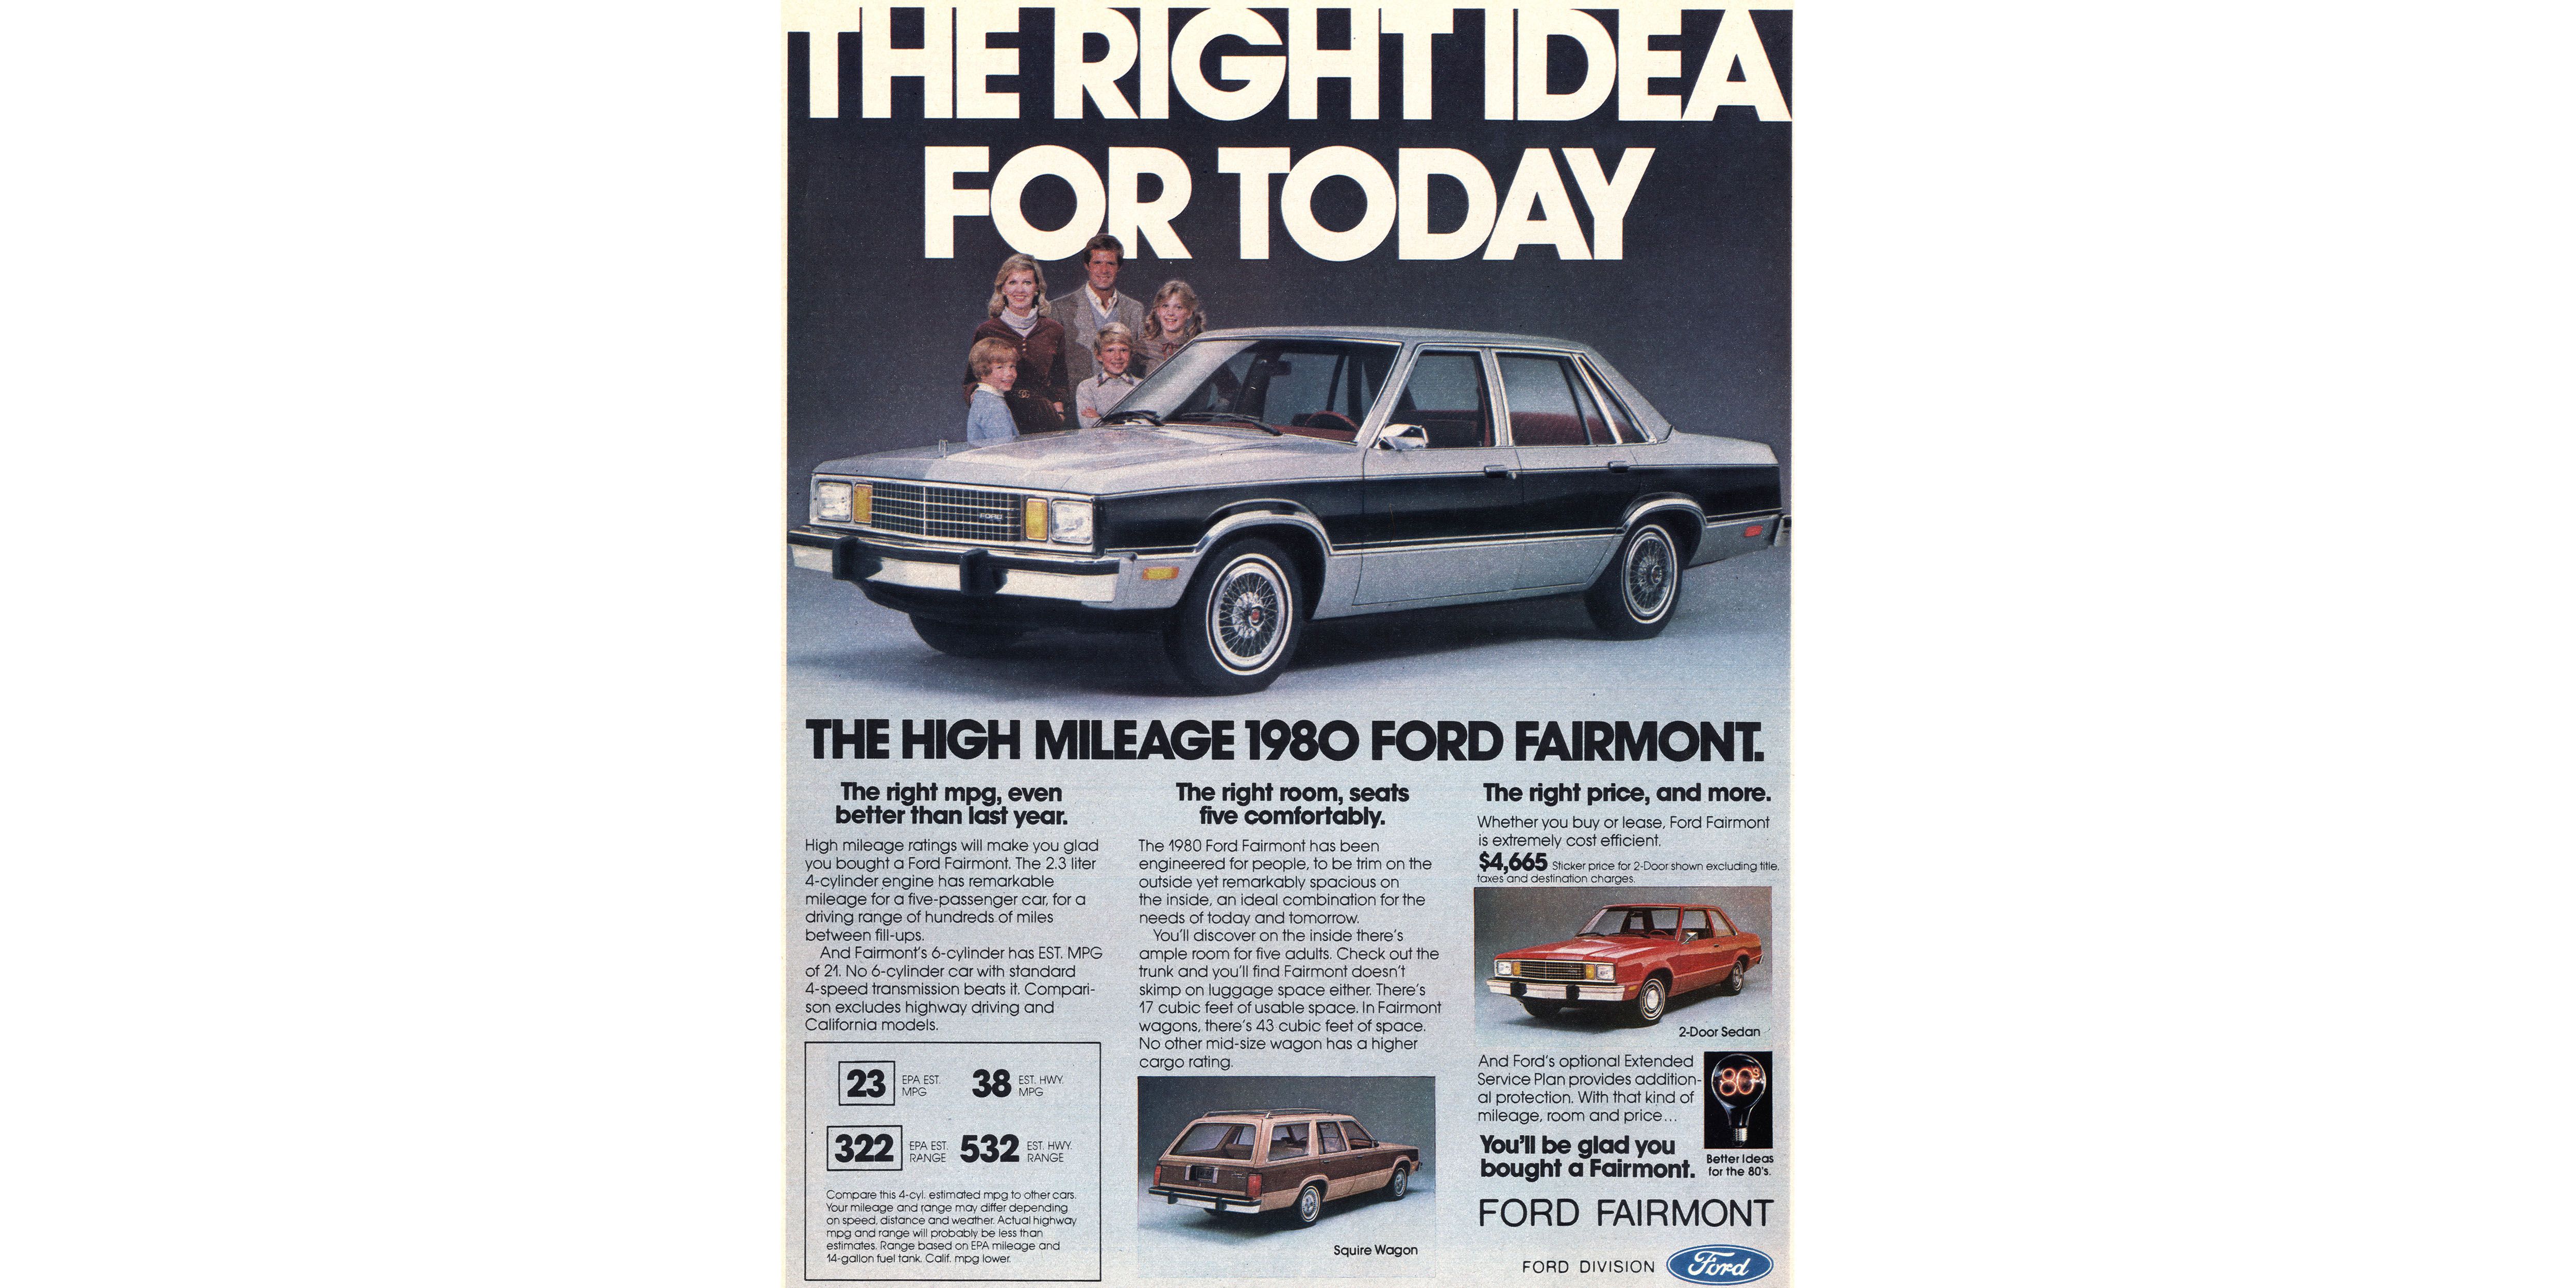 Pinto-Engined 1980 Ford Fairmont Fears No Gas Crisis